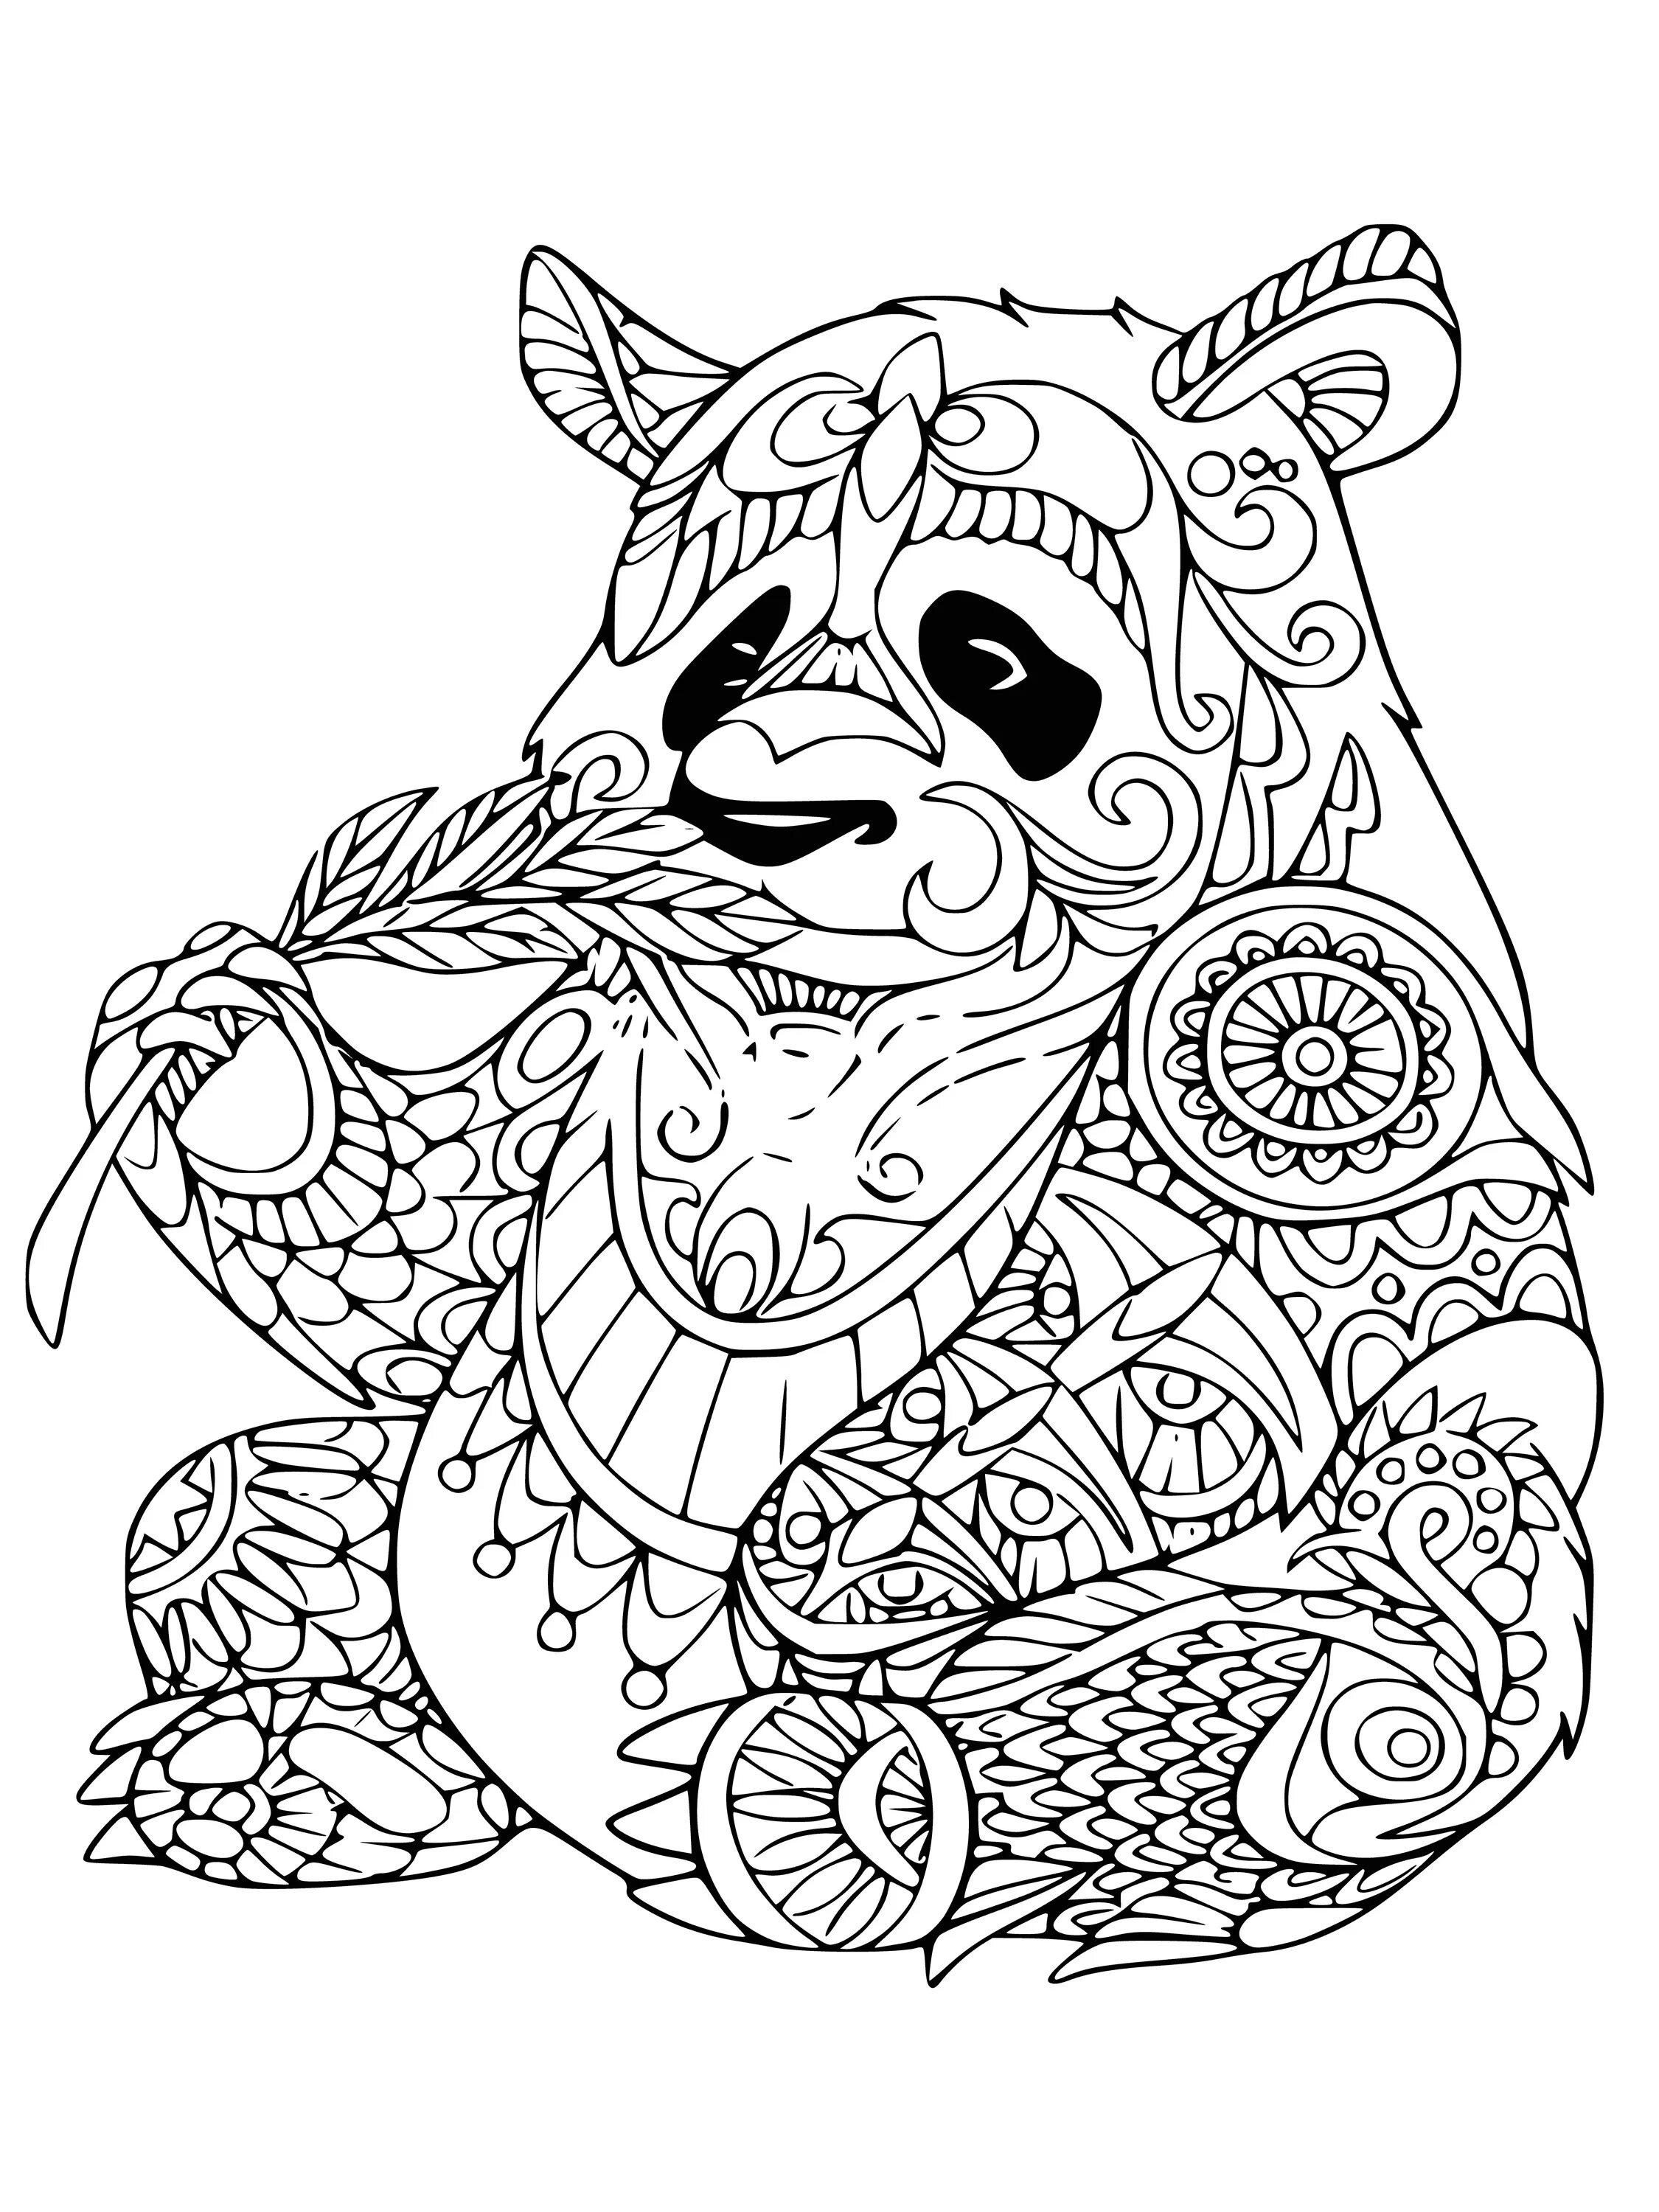 Trendy animal coloring pages